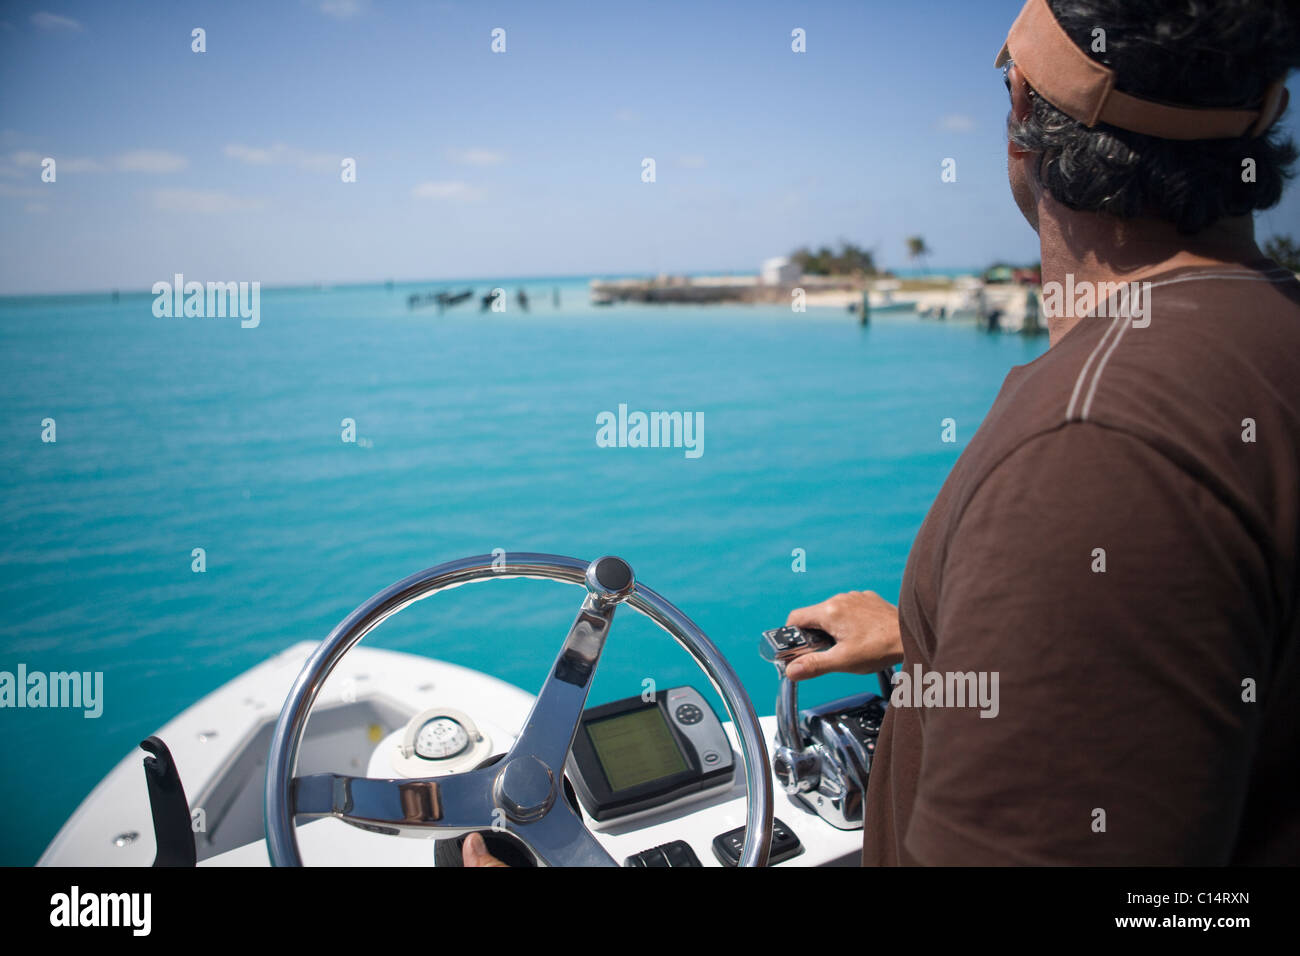 A fisherman steers his boat and hits the throttle from the fly bridge as he gazes out at the blue-green tropical waters. Stock Photo